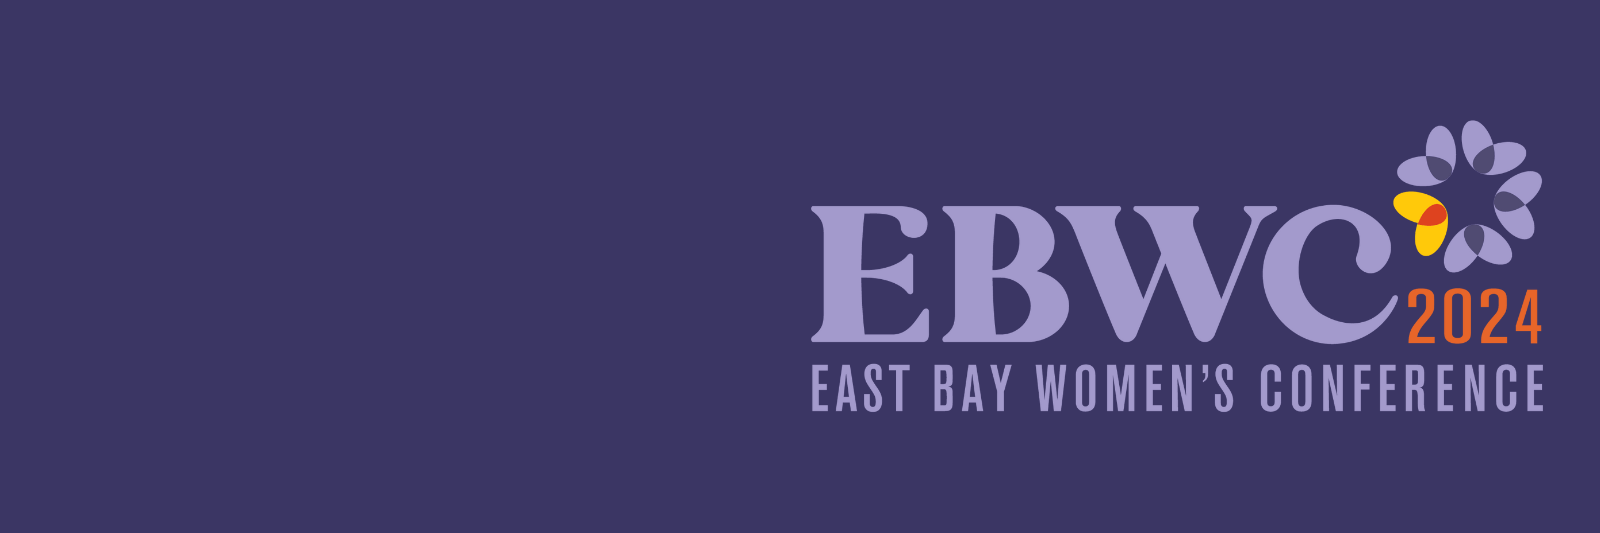 2024 East Bay Women's Conference logo